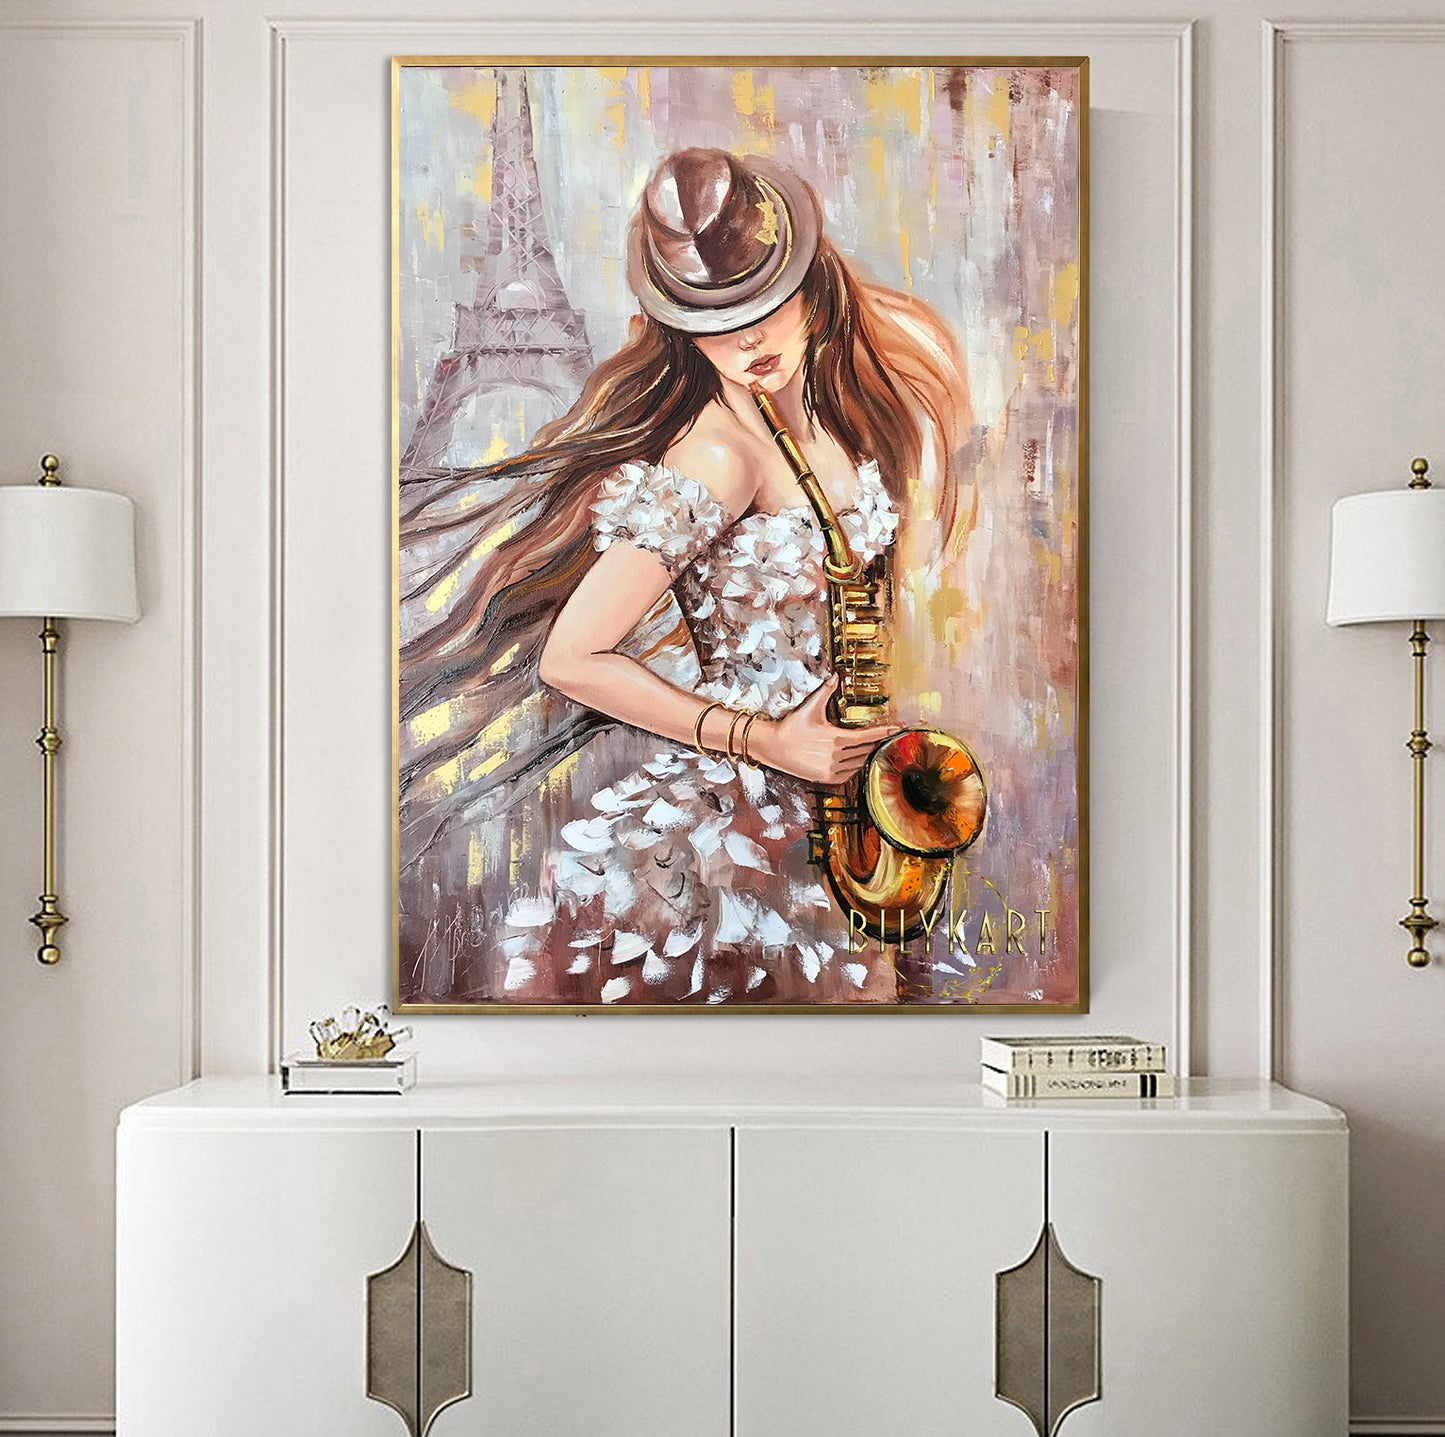 Girl Playing Saxophone Painting on Canvas Saxophonist Player Wall Art Paris France Oil Painting Large Abstract Jazz Player Painting